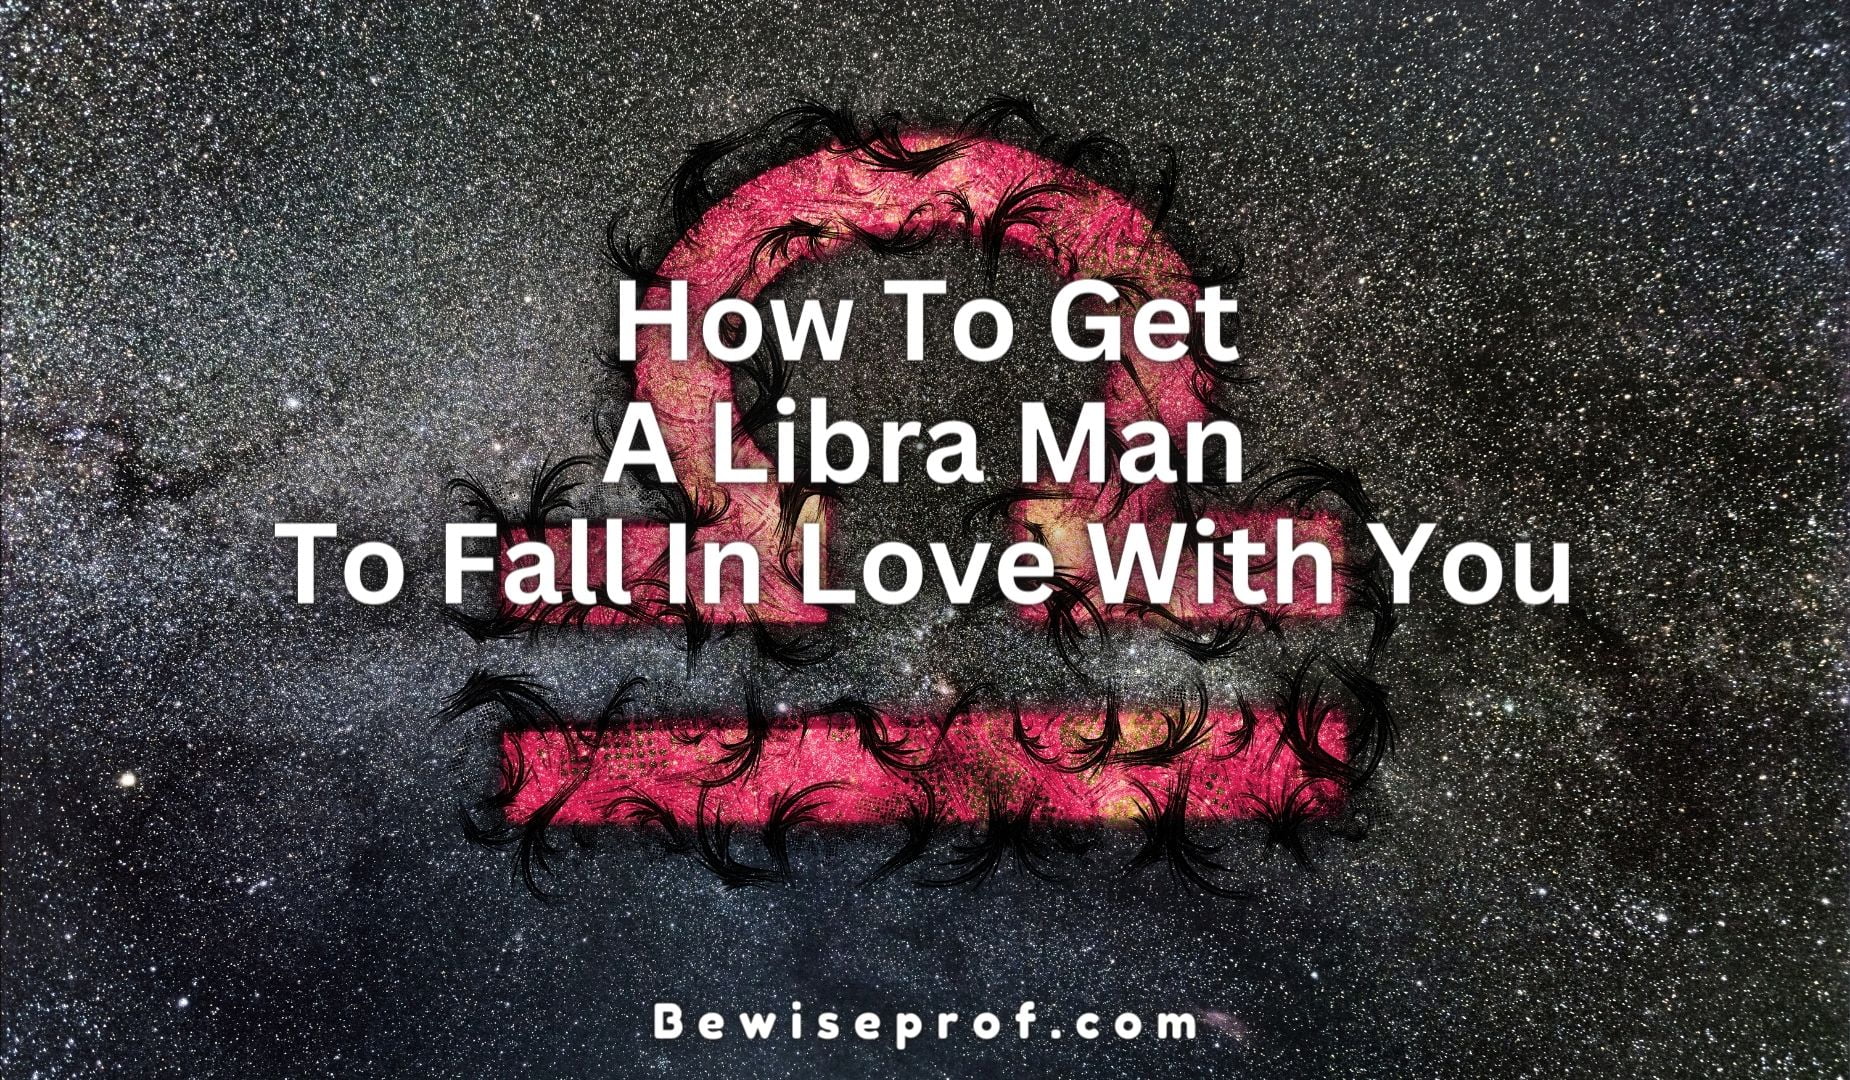 How To Get A Libra Man To Fall In Love With You